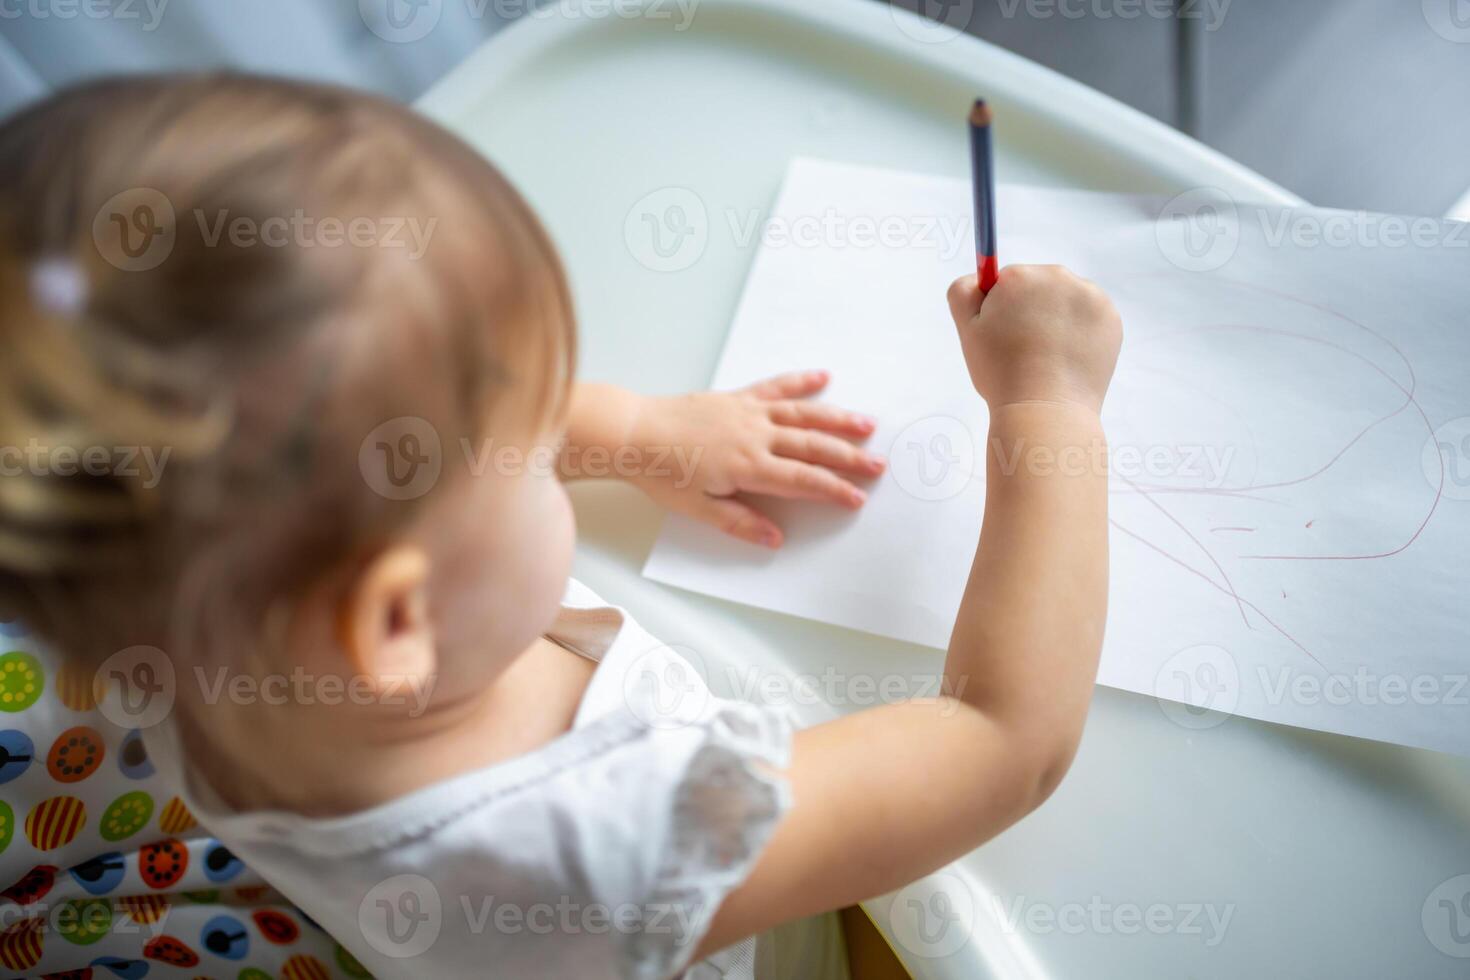 Cute little girl painting with red pencil at home. Creative games for kids. Stay at home entertainment photo